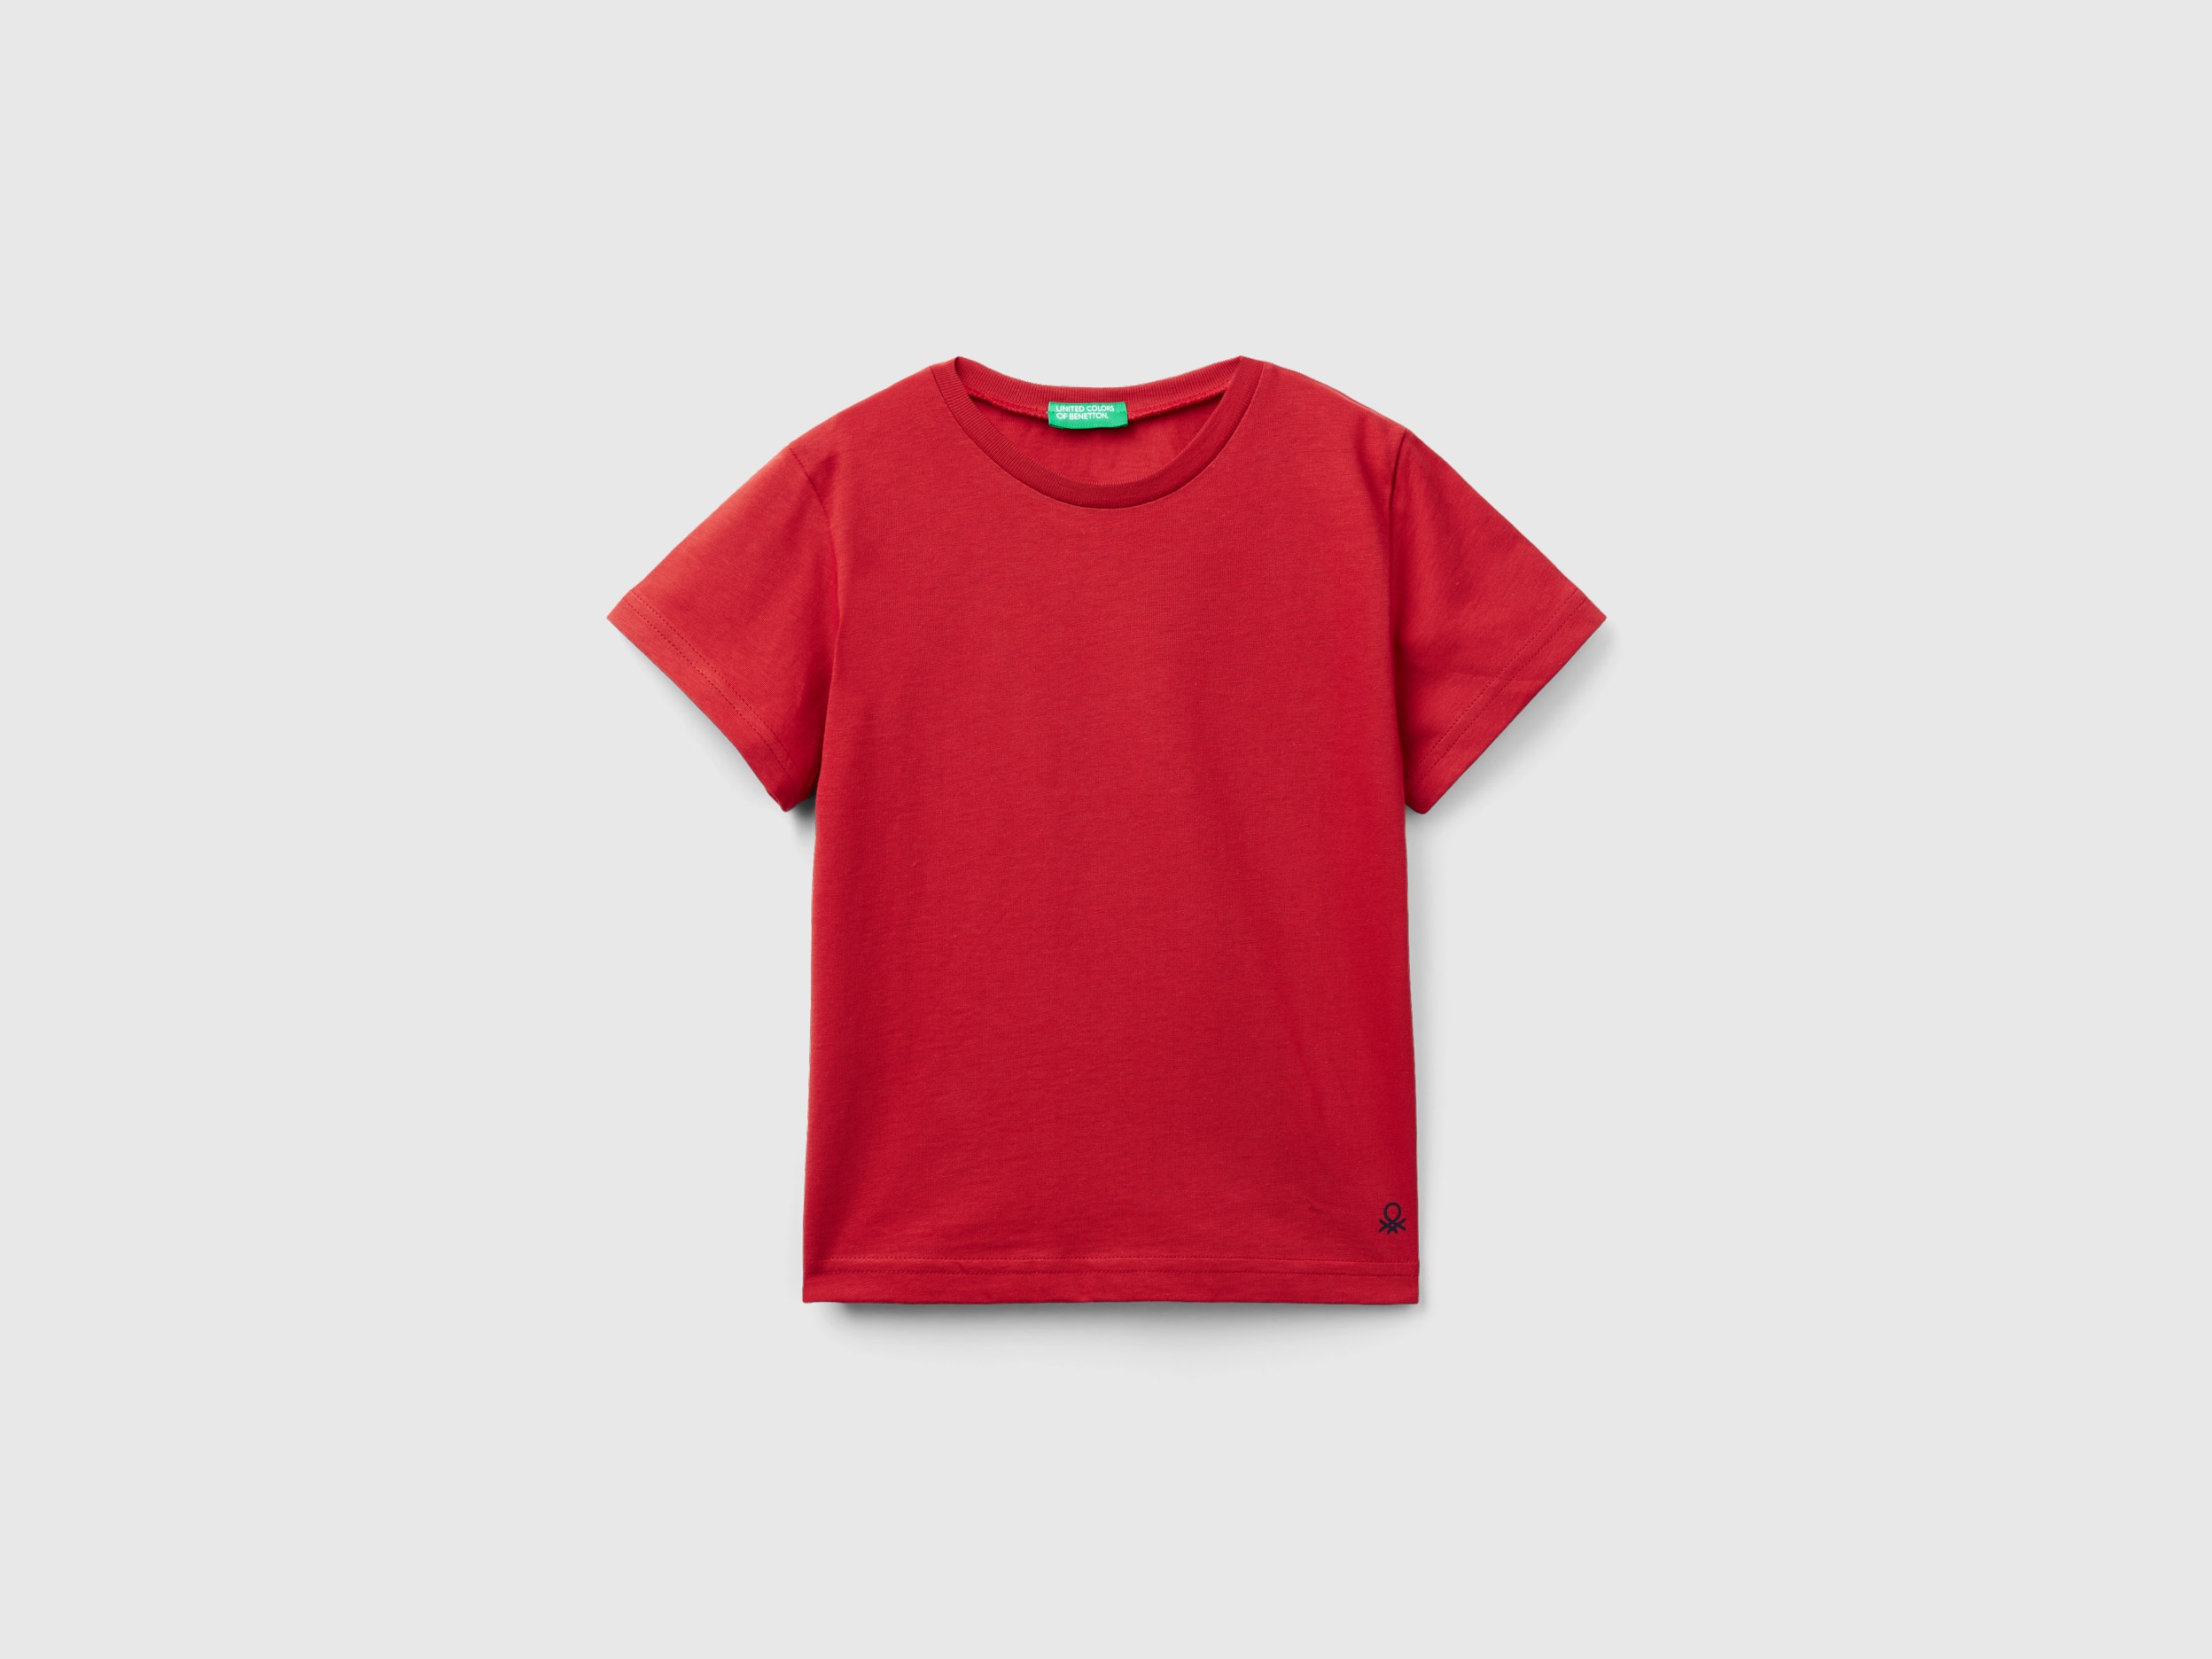 Image of Benetton, T-shirt In Organic Cotton, size 82, Brick Red, Kids